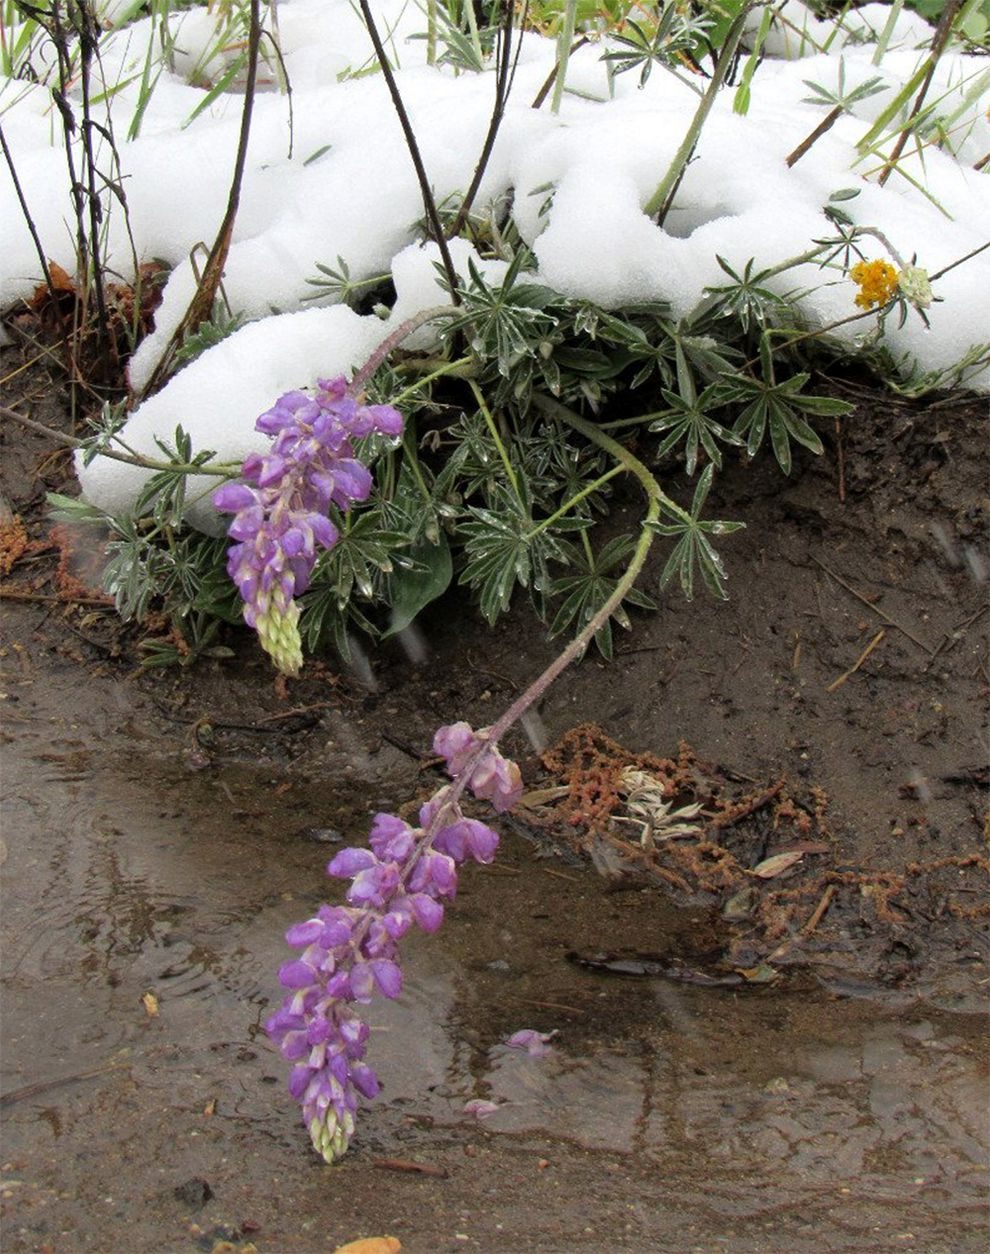 Some flowers managed to escape the brunt of the icy blast. 